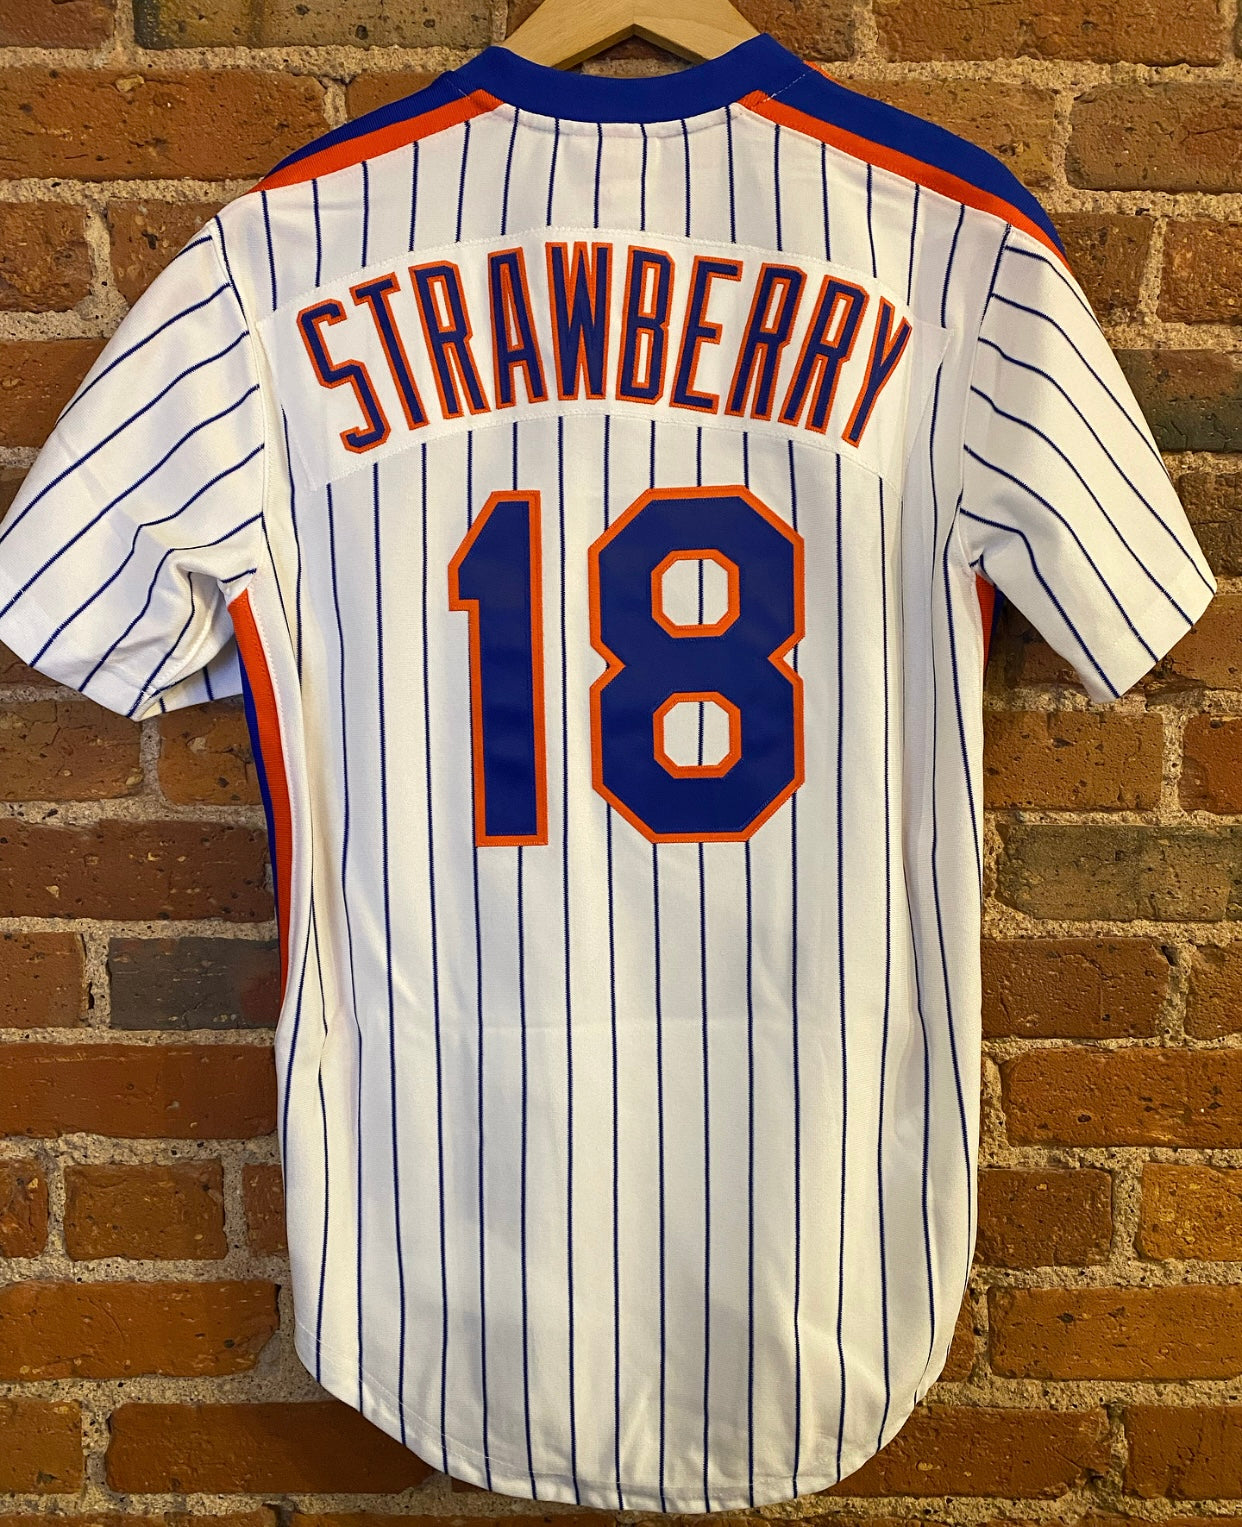 Exclusive Fitted Mitchell & Ness Authentic New York Mets 1986 Darryl Strawberry Jersey 3XL